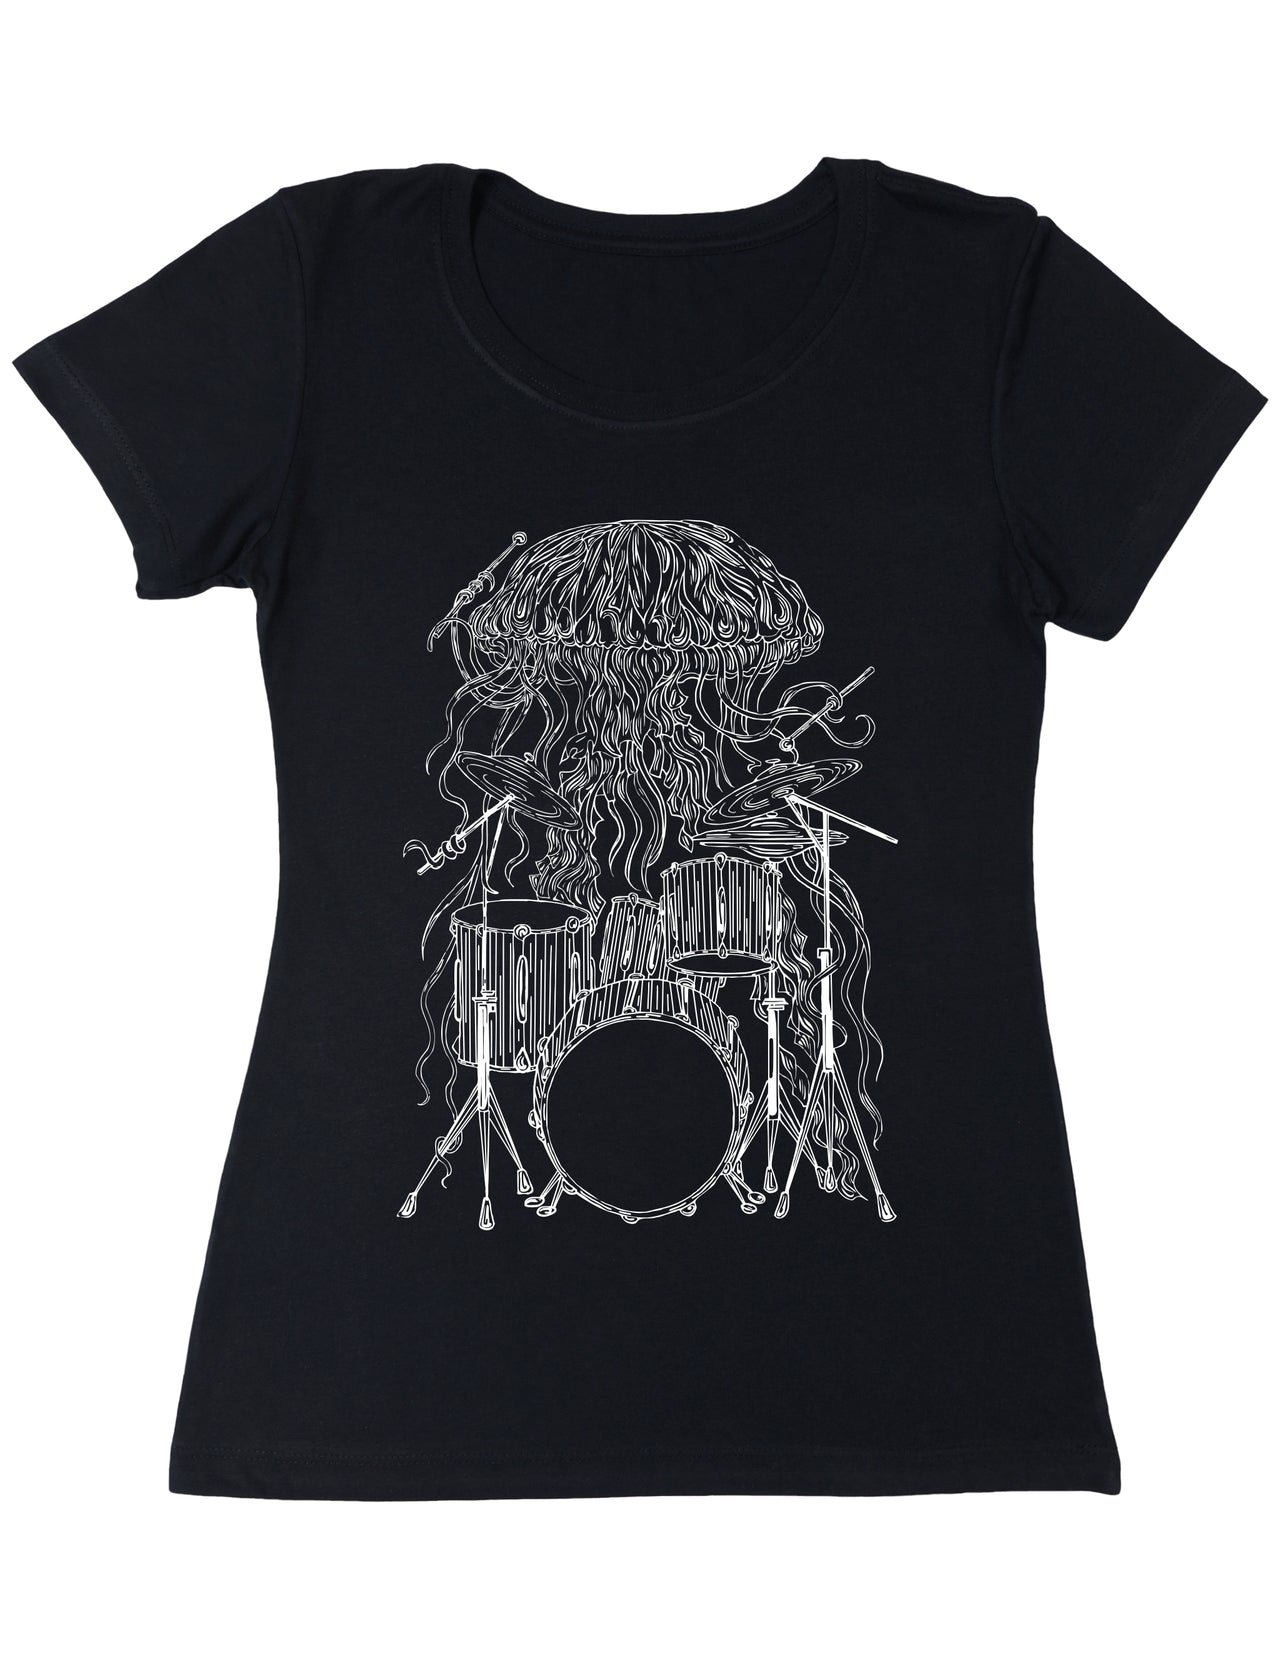 SEEMBO Jellyfish Playing Drums Women's Poly-Cotton T-Shirt